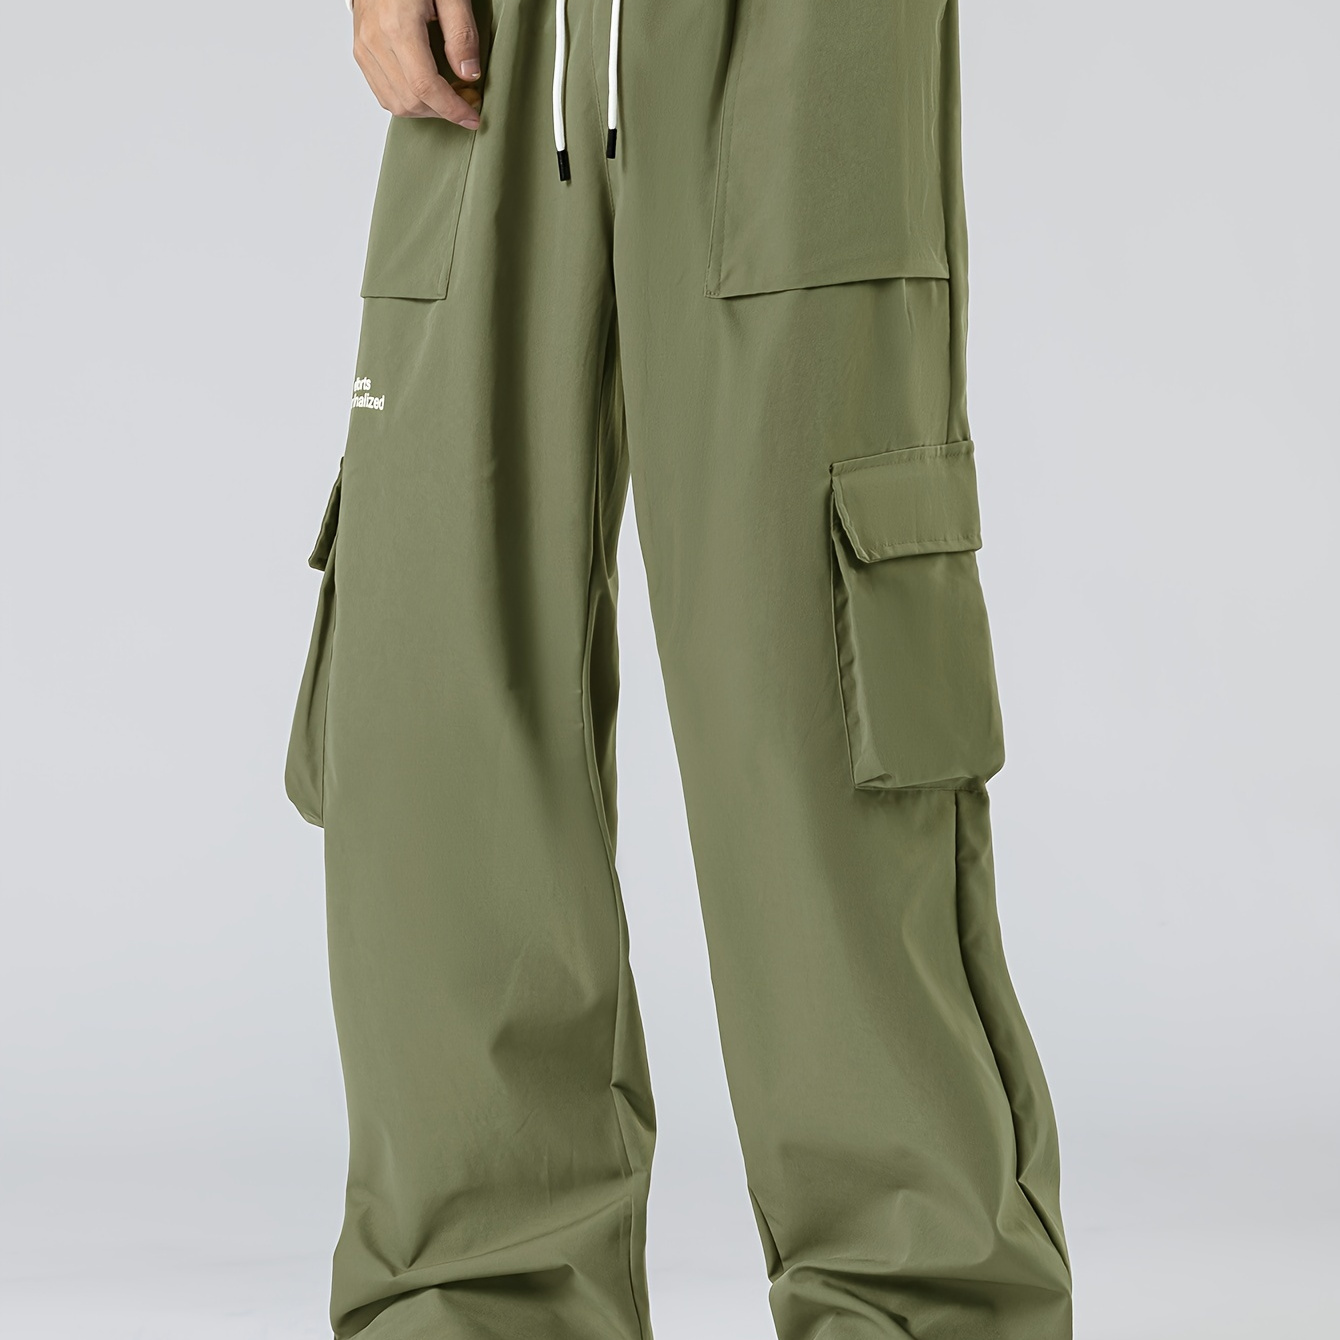 

Men's Relaxed Fit Drawstring Cargo Pants With Pockets, Loose Trendy Overalls